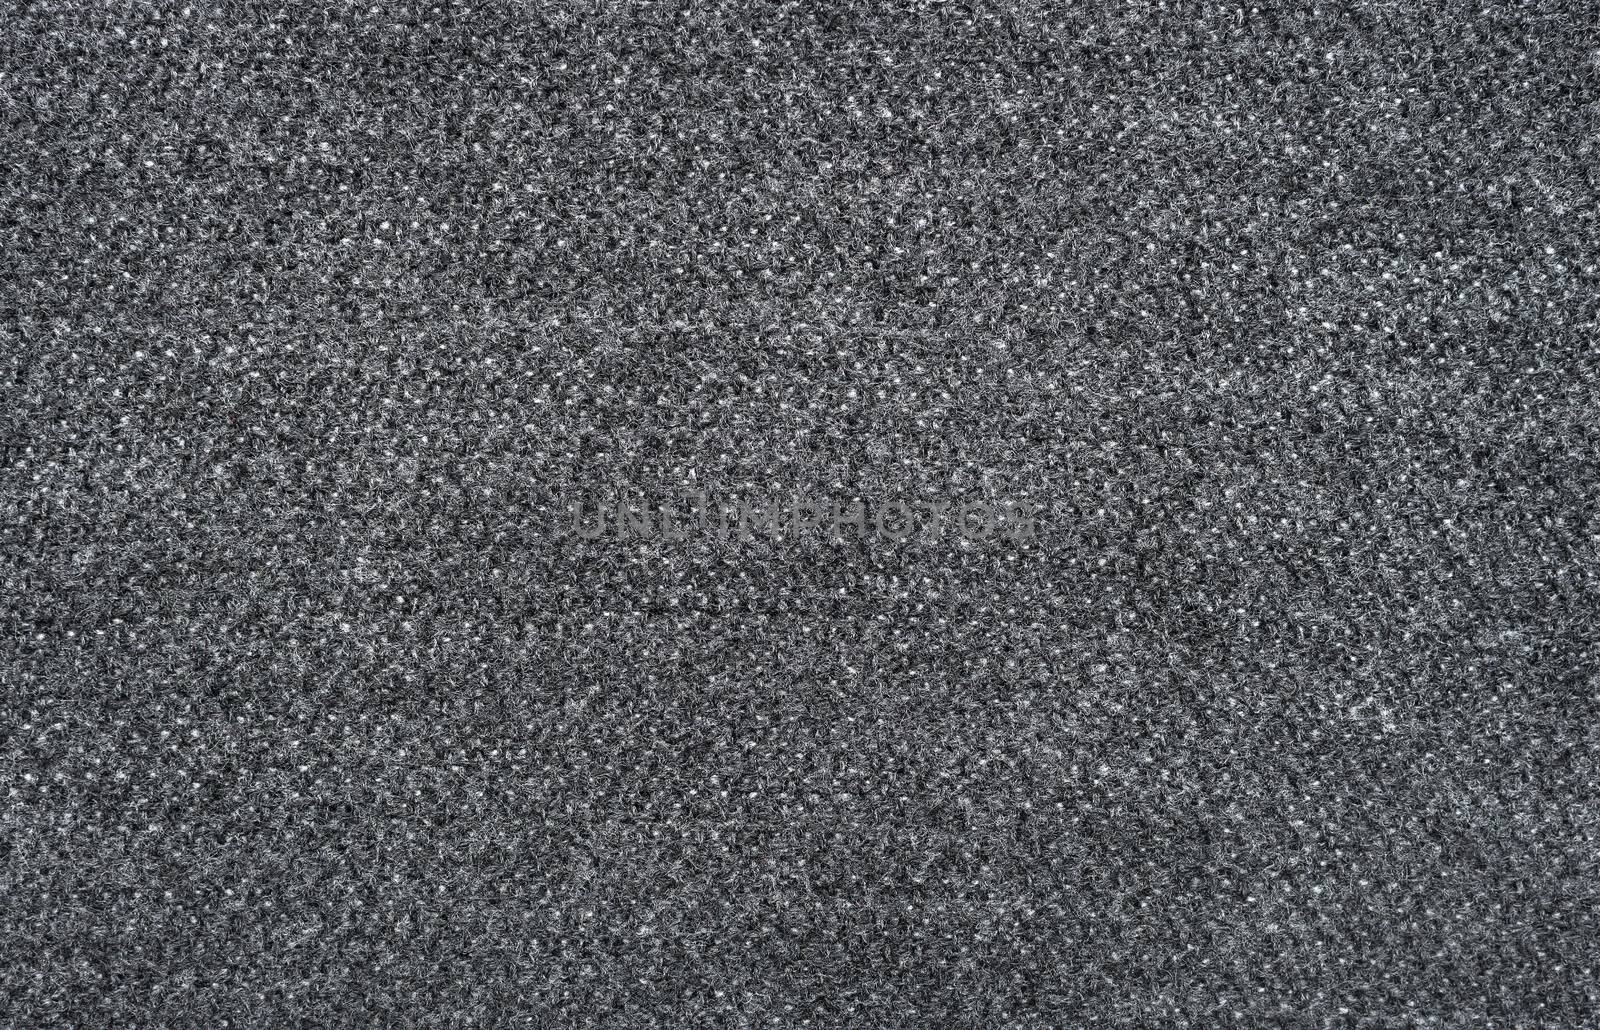 Grey fabric wallpaper background close-up